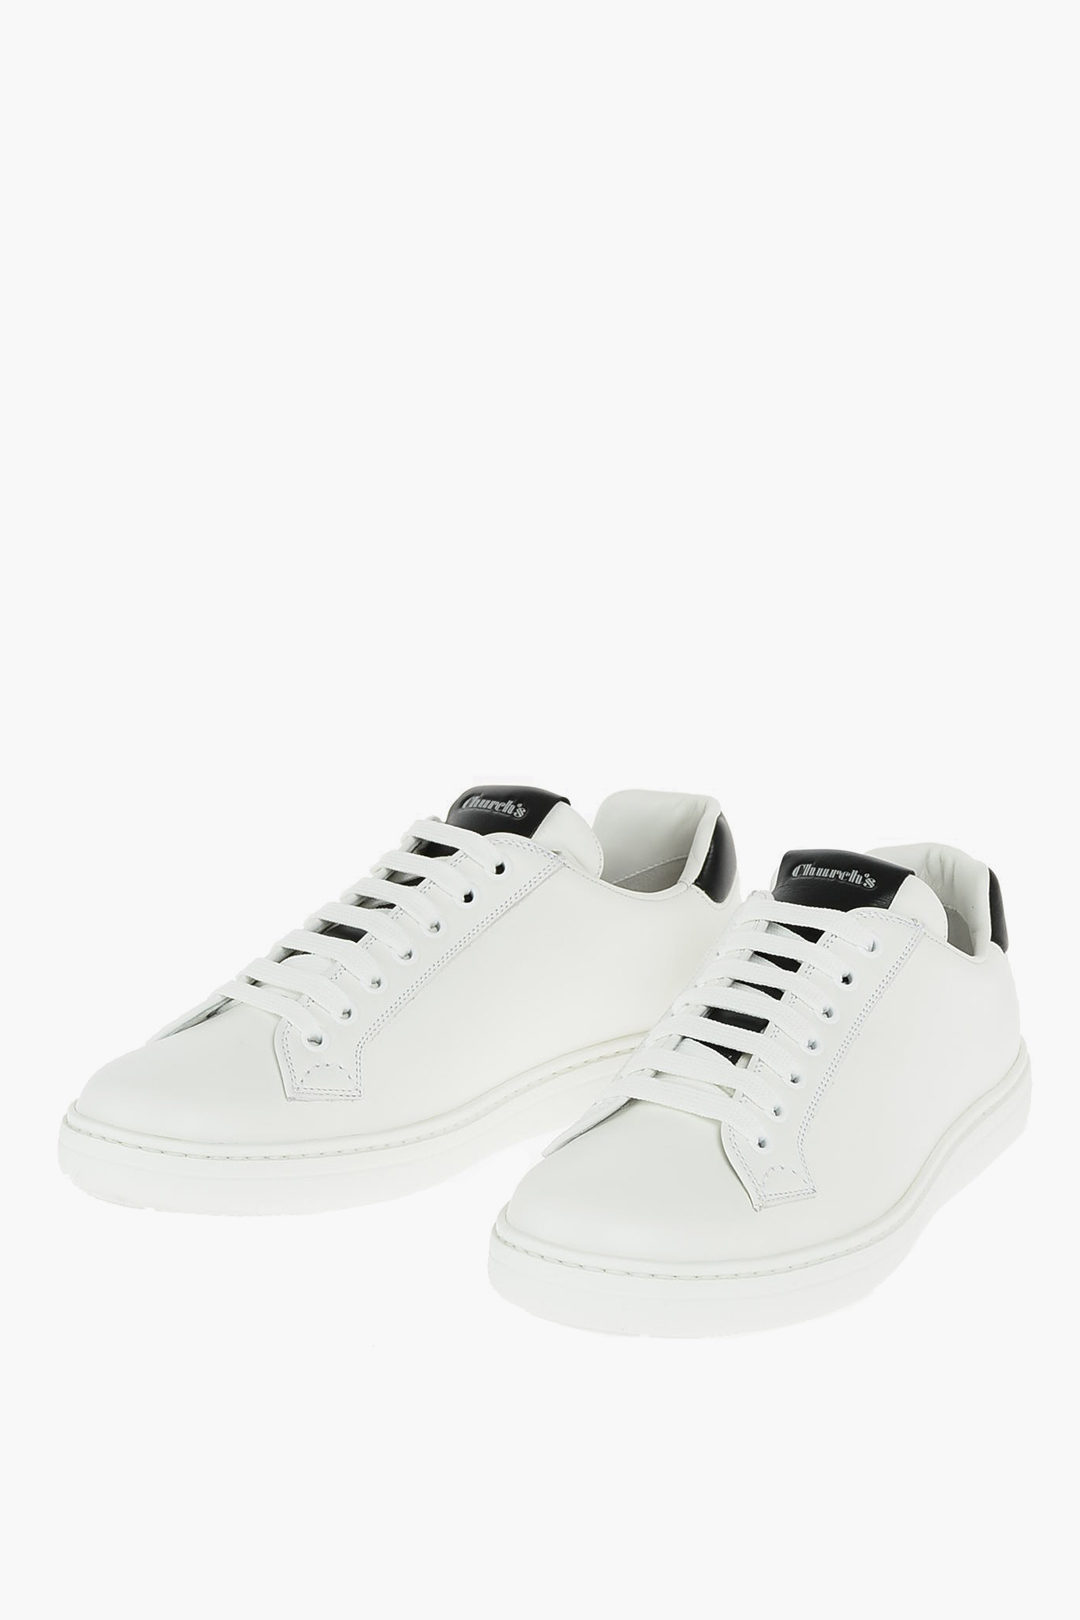 Church's Leather BOLAND Sneakers with Contrasting Tongue men - Glamood ...